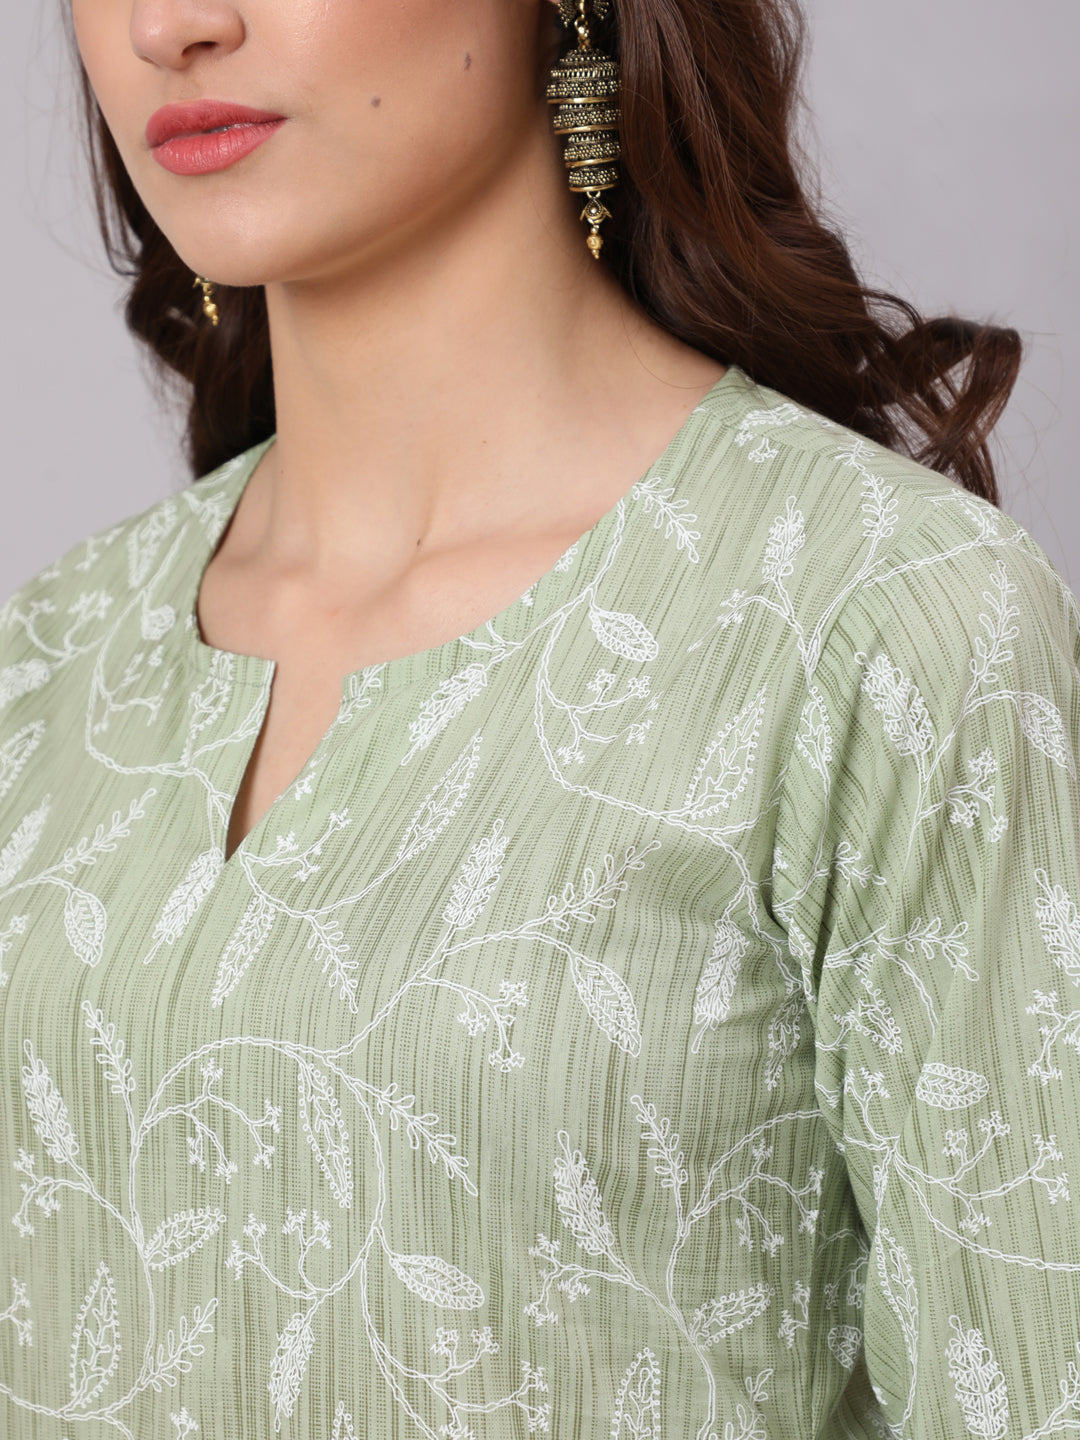 Women's Green Printed Straight Kurta and White Solid Palazzo With Lace Detail - Nayo Clothing